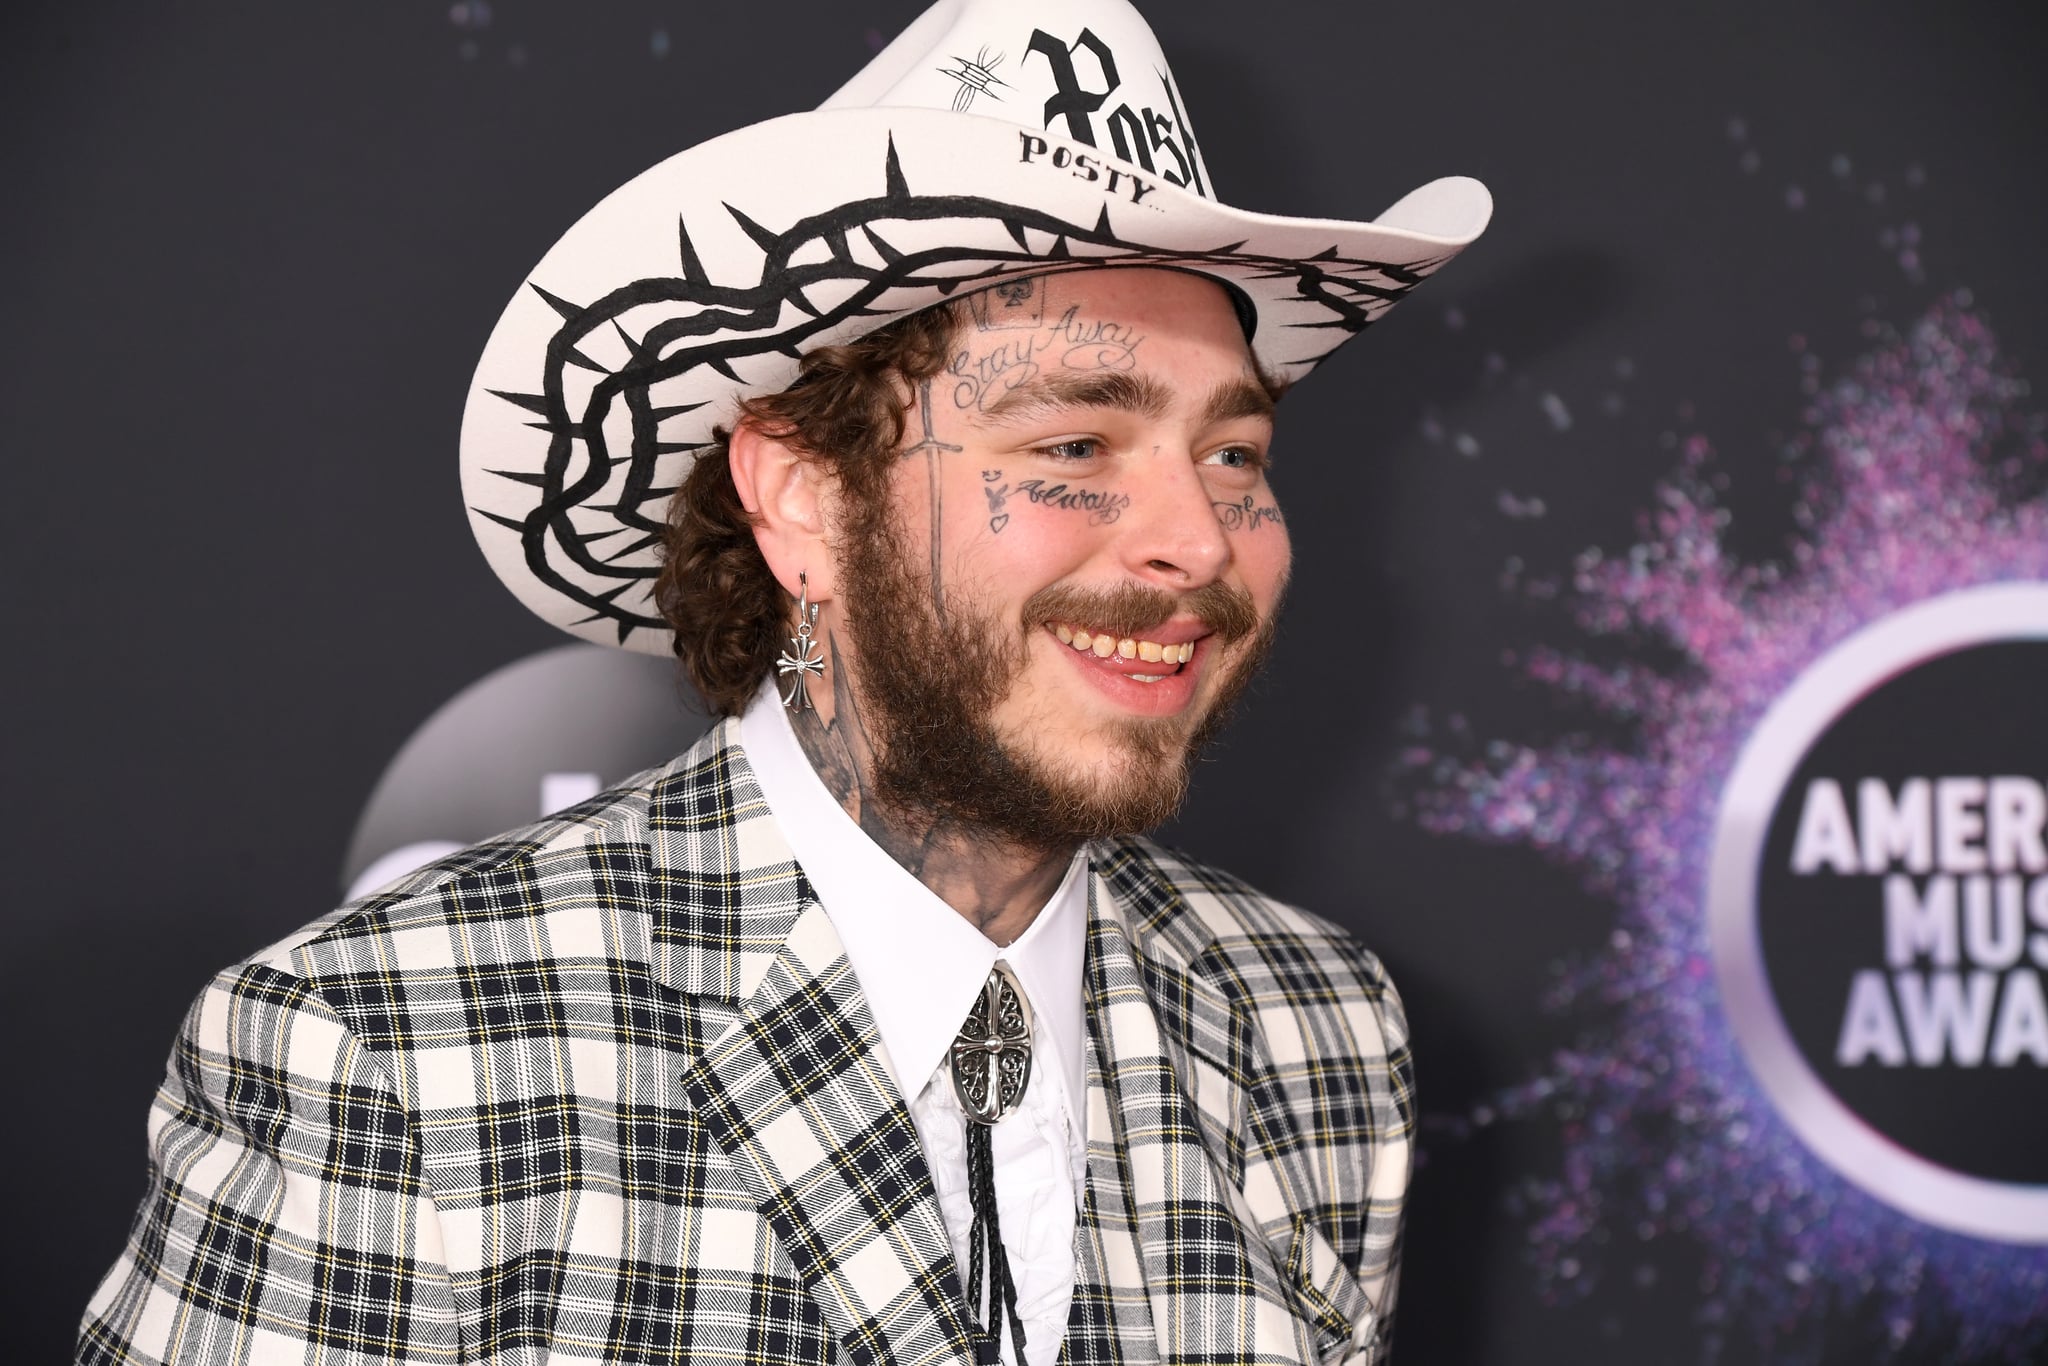 How many tattoos does Post Malone have and what do they mean